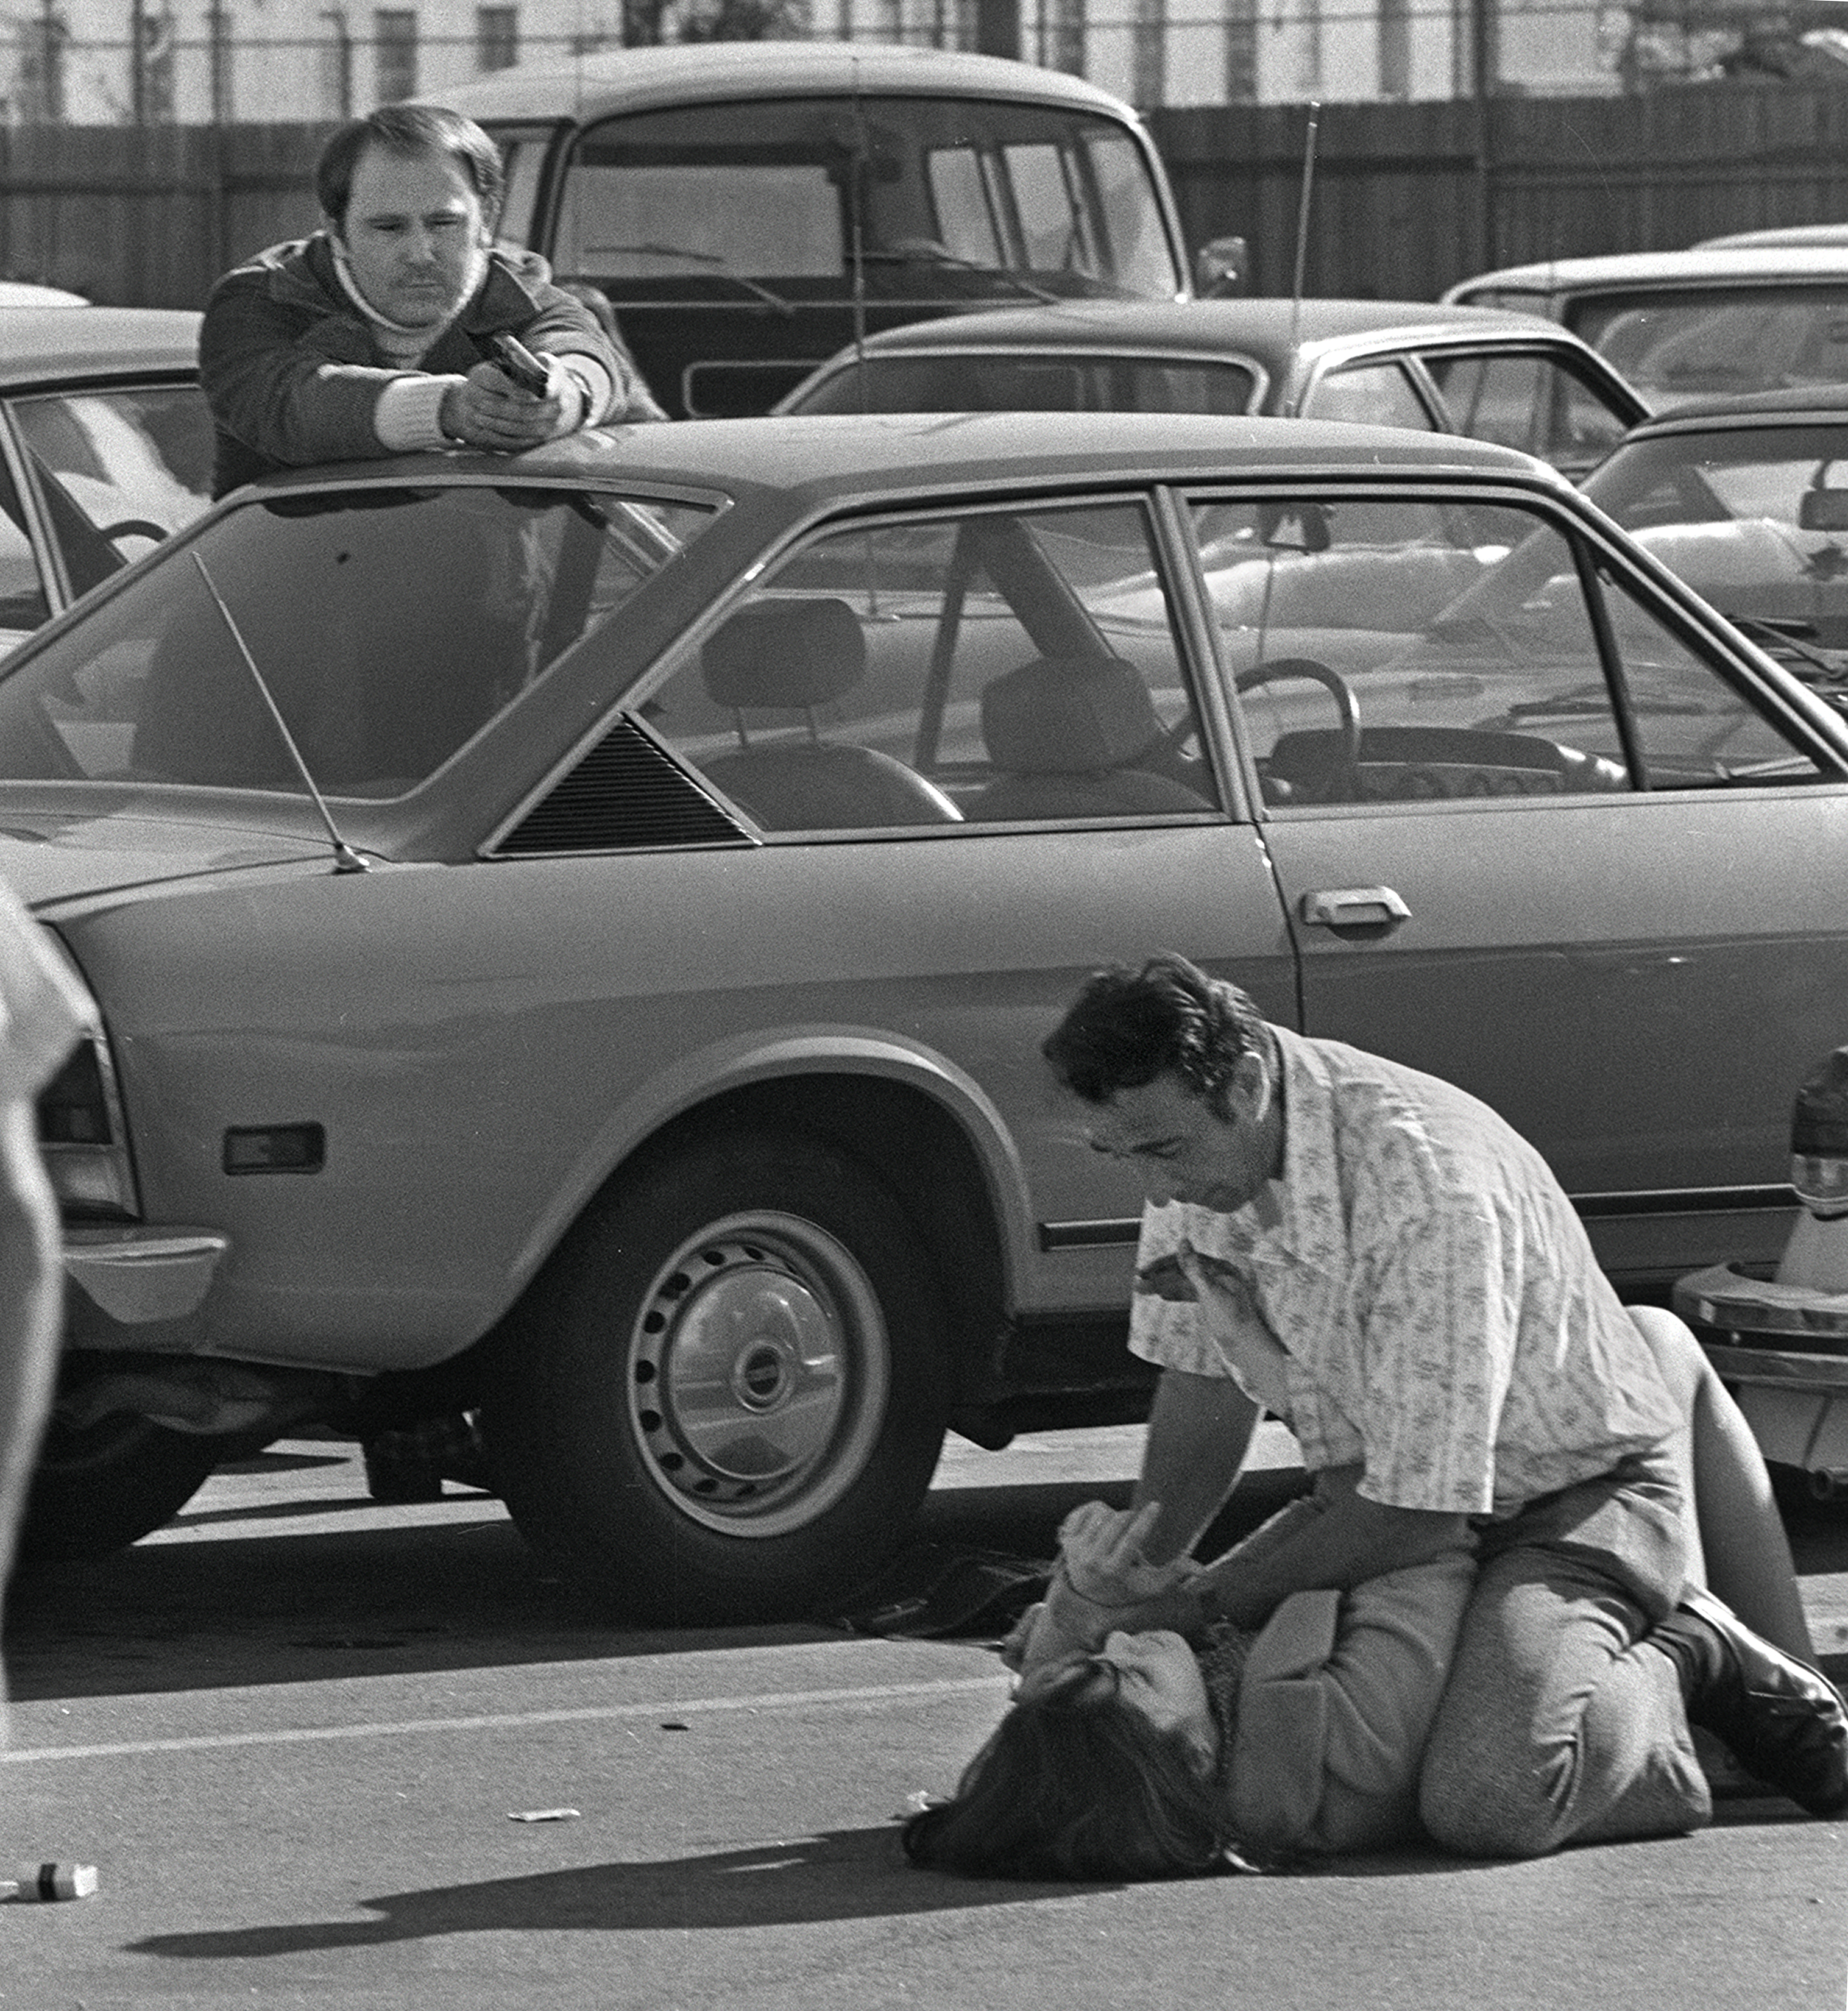 George H. Derby, left, a security guard, aims his gun at Edward F. Fisher, 39, who holds a knife to the throat of Ellen Sheldon, 22, during a kidnapping attempt in a Hollywood parking lot, Nov. 23, 1973. Sheldon managed to struggle to her feet, and seconds later Derby fired once after warning the suspect repeatedly. Fisher was killed instantly; Sheldon sustained minor injuries. (Anthony K. Roberts via AP)